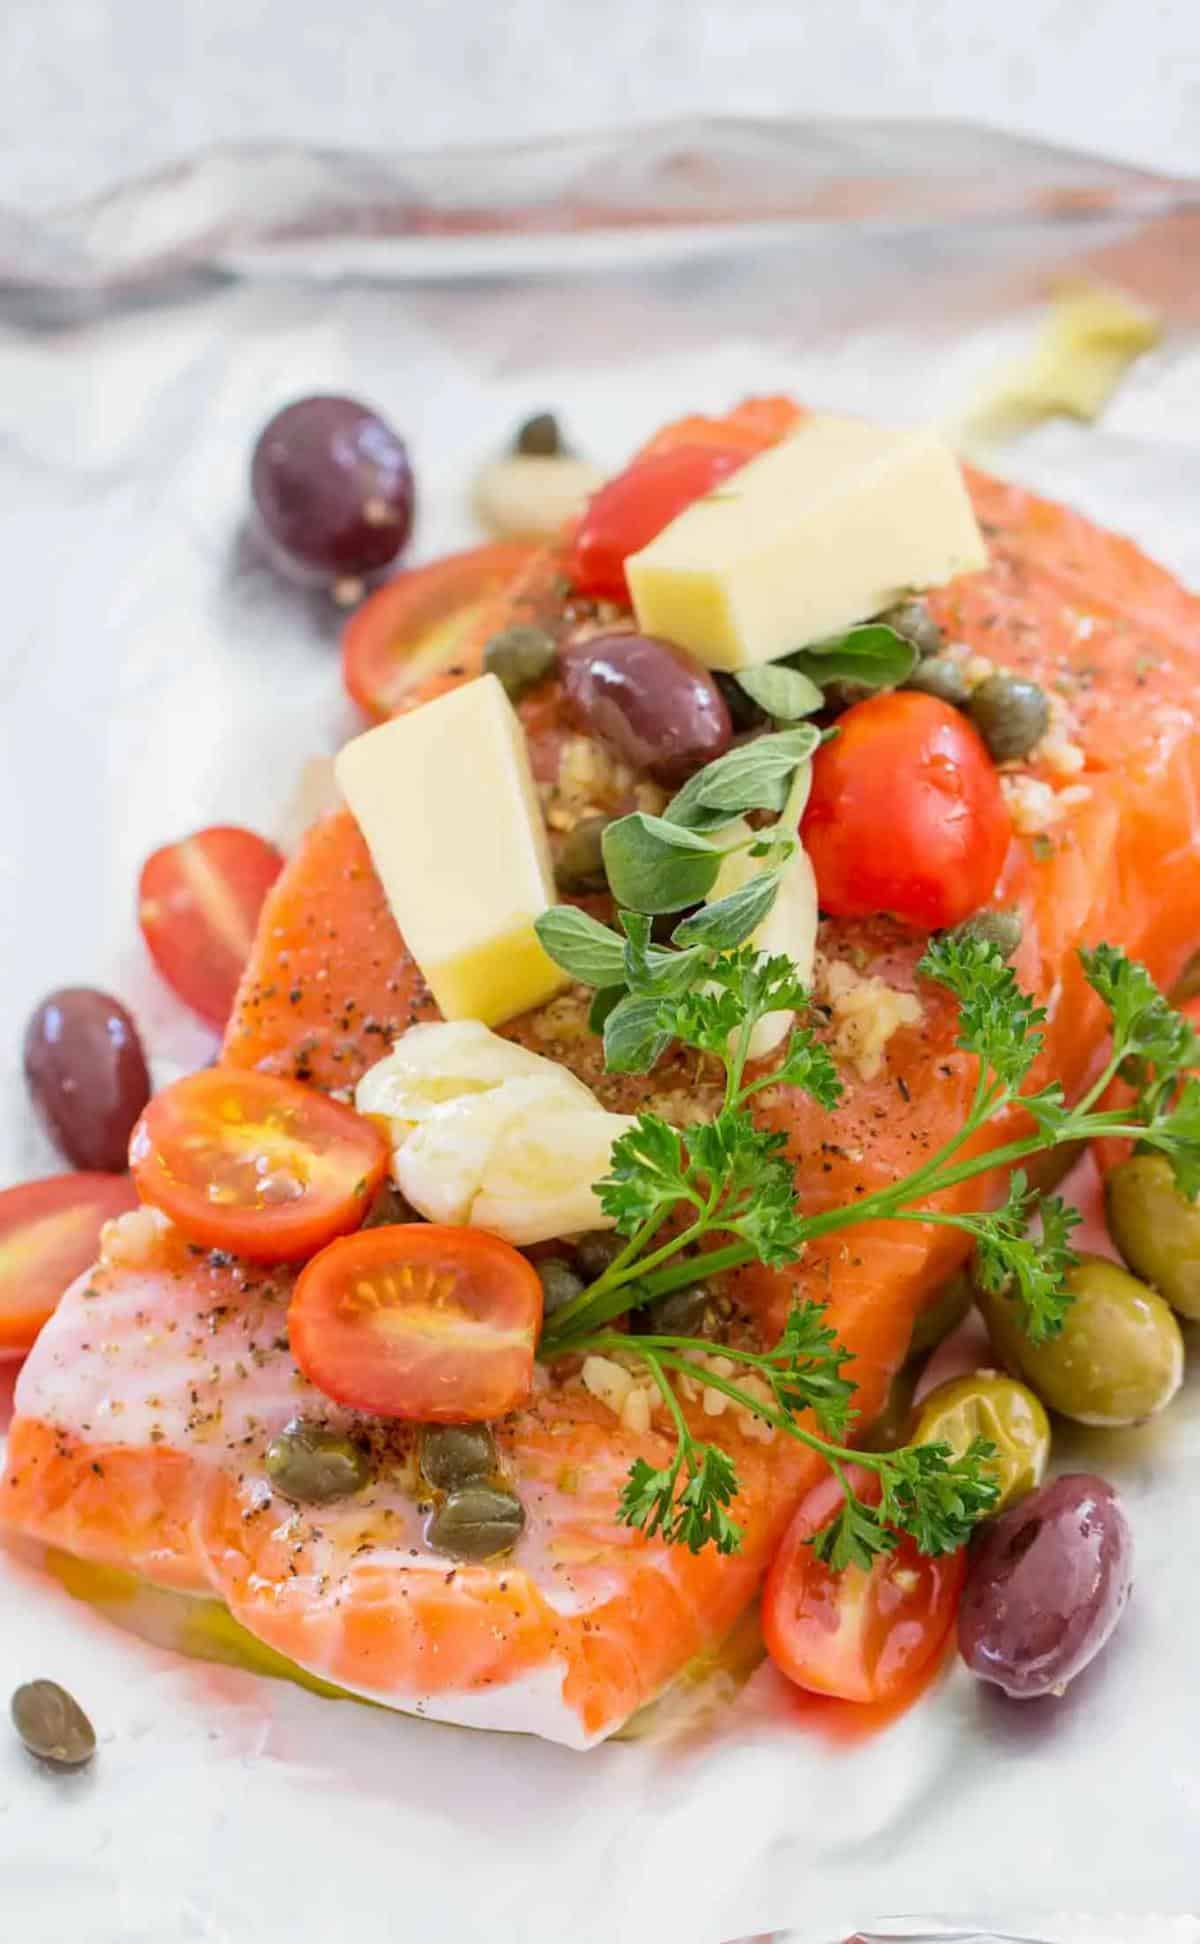 a cooked salmon fillet topped with tomatoes, olives and herbs.